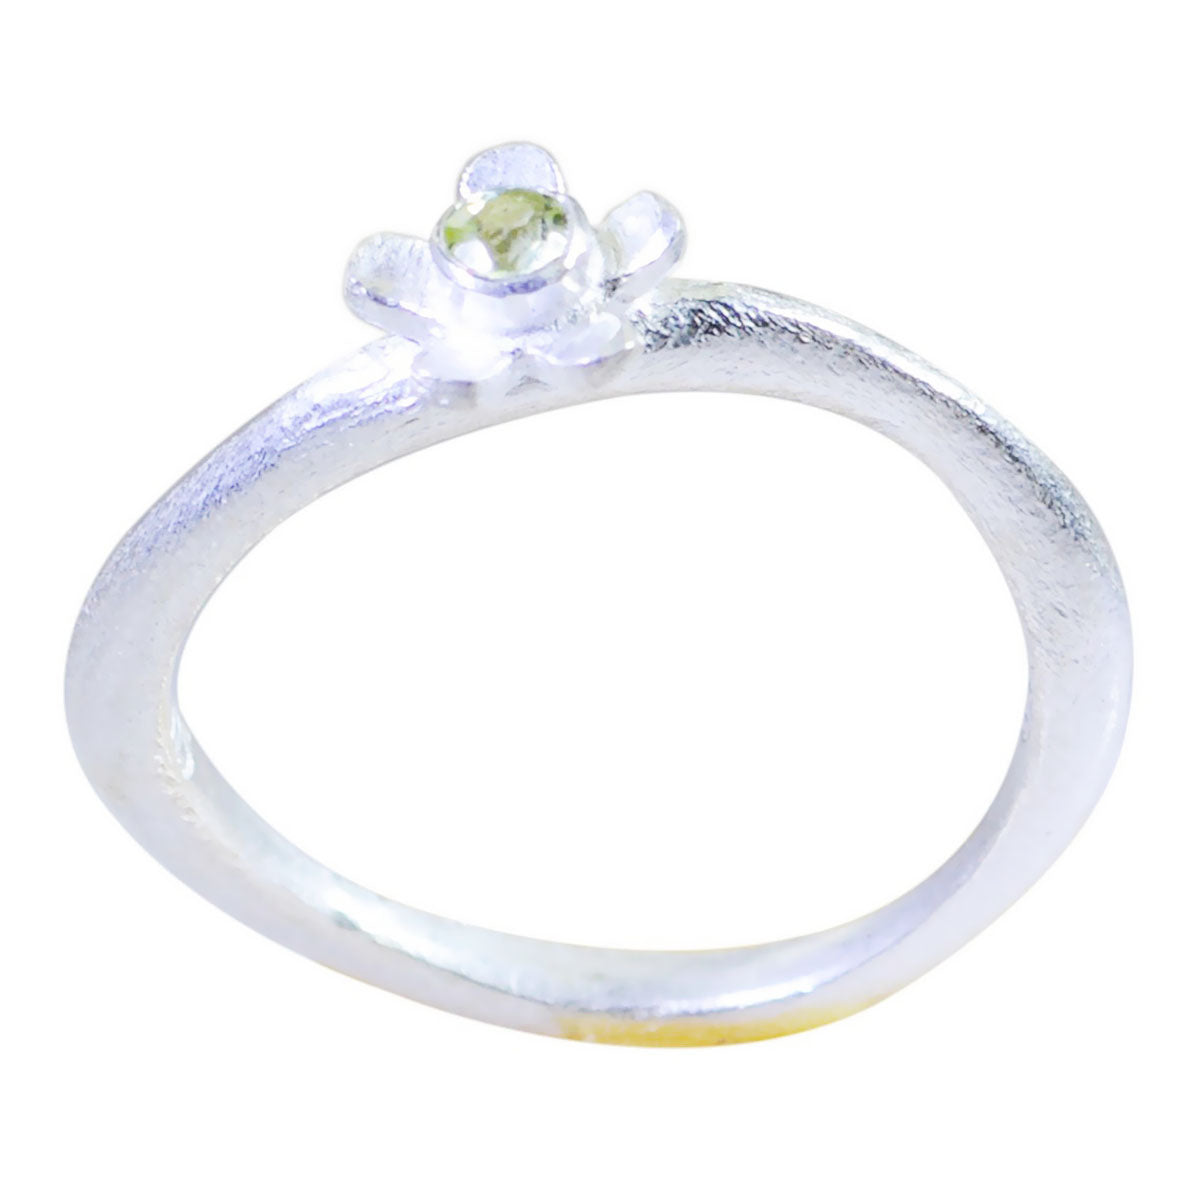 Riyo Shapely Stone Peridot Solid Silver Rings Gift For College